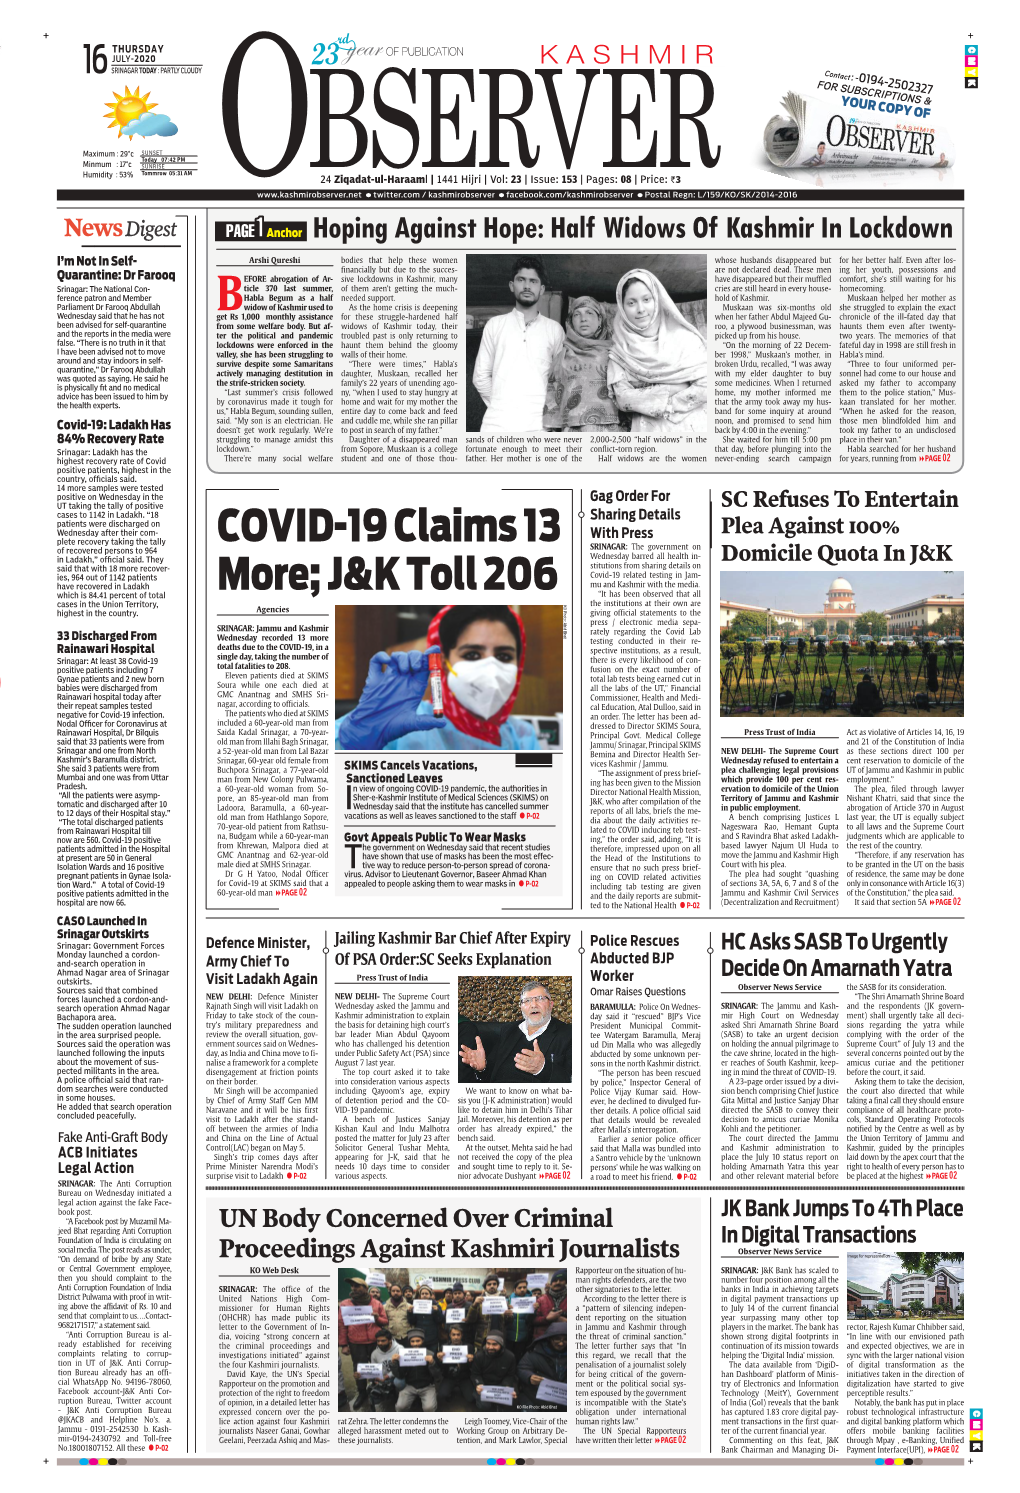 COVID-19 Claims 13 More; J&K Toll